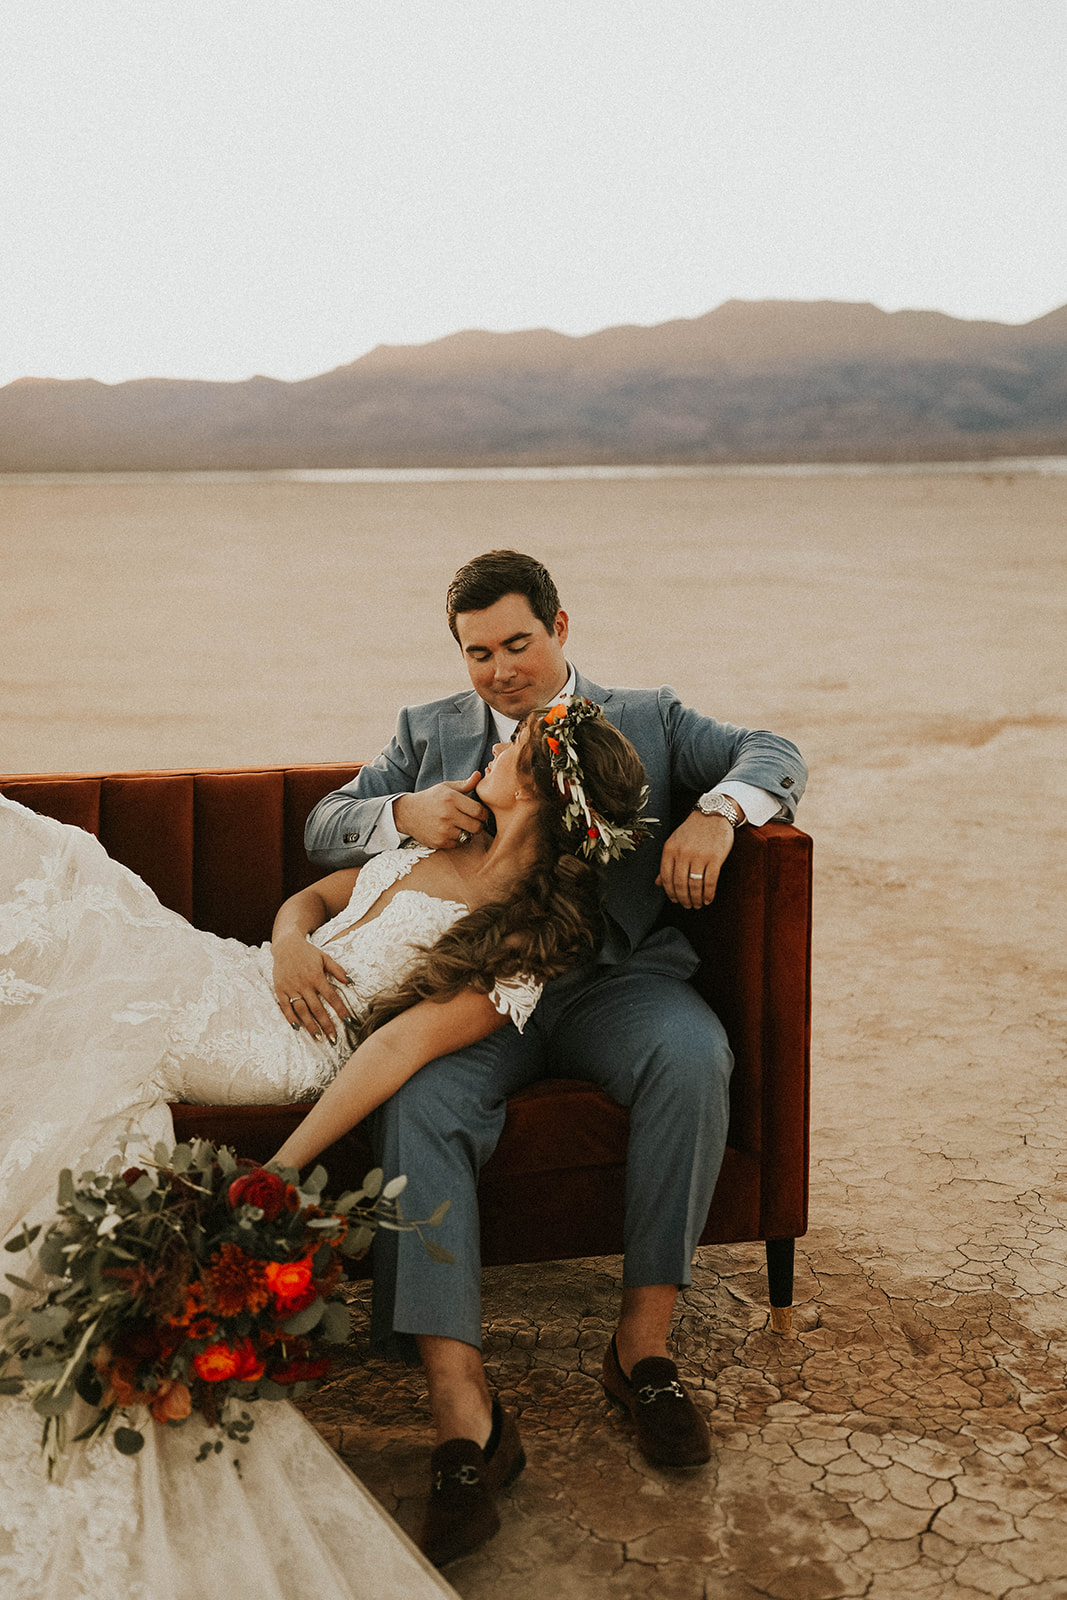 Groom touching Bride's face on Velvet Couch during Sunset in Dry Lake Bed Fall Inspired Elopement in Las Vegas